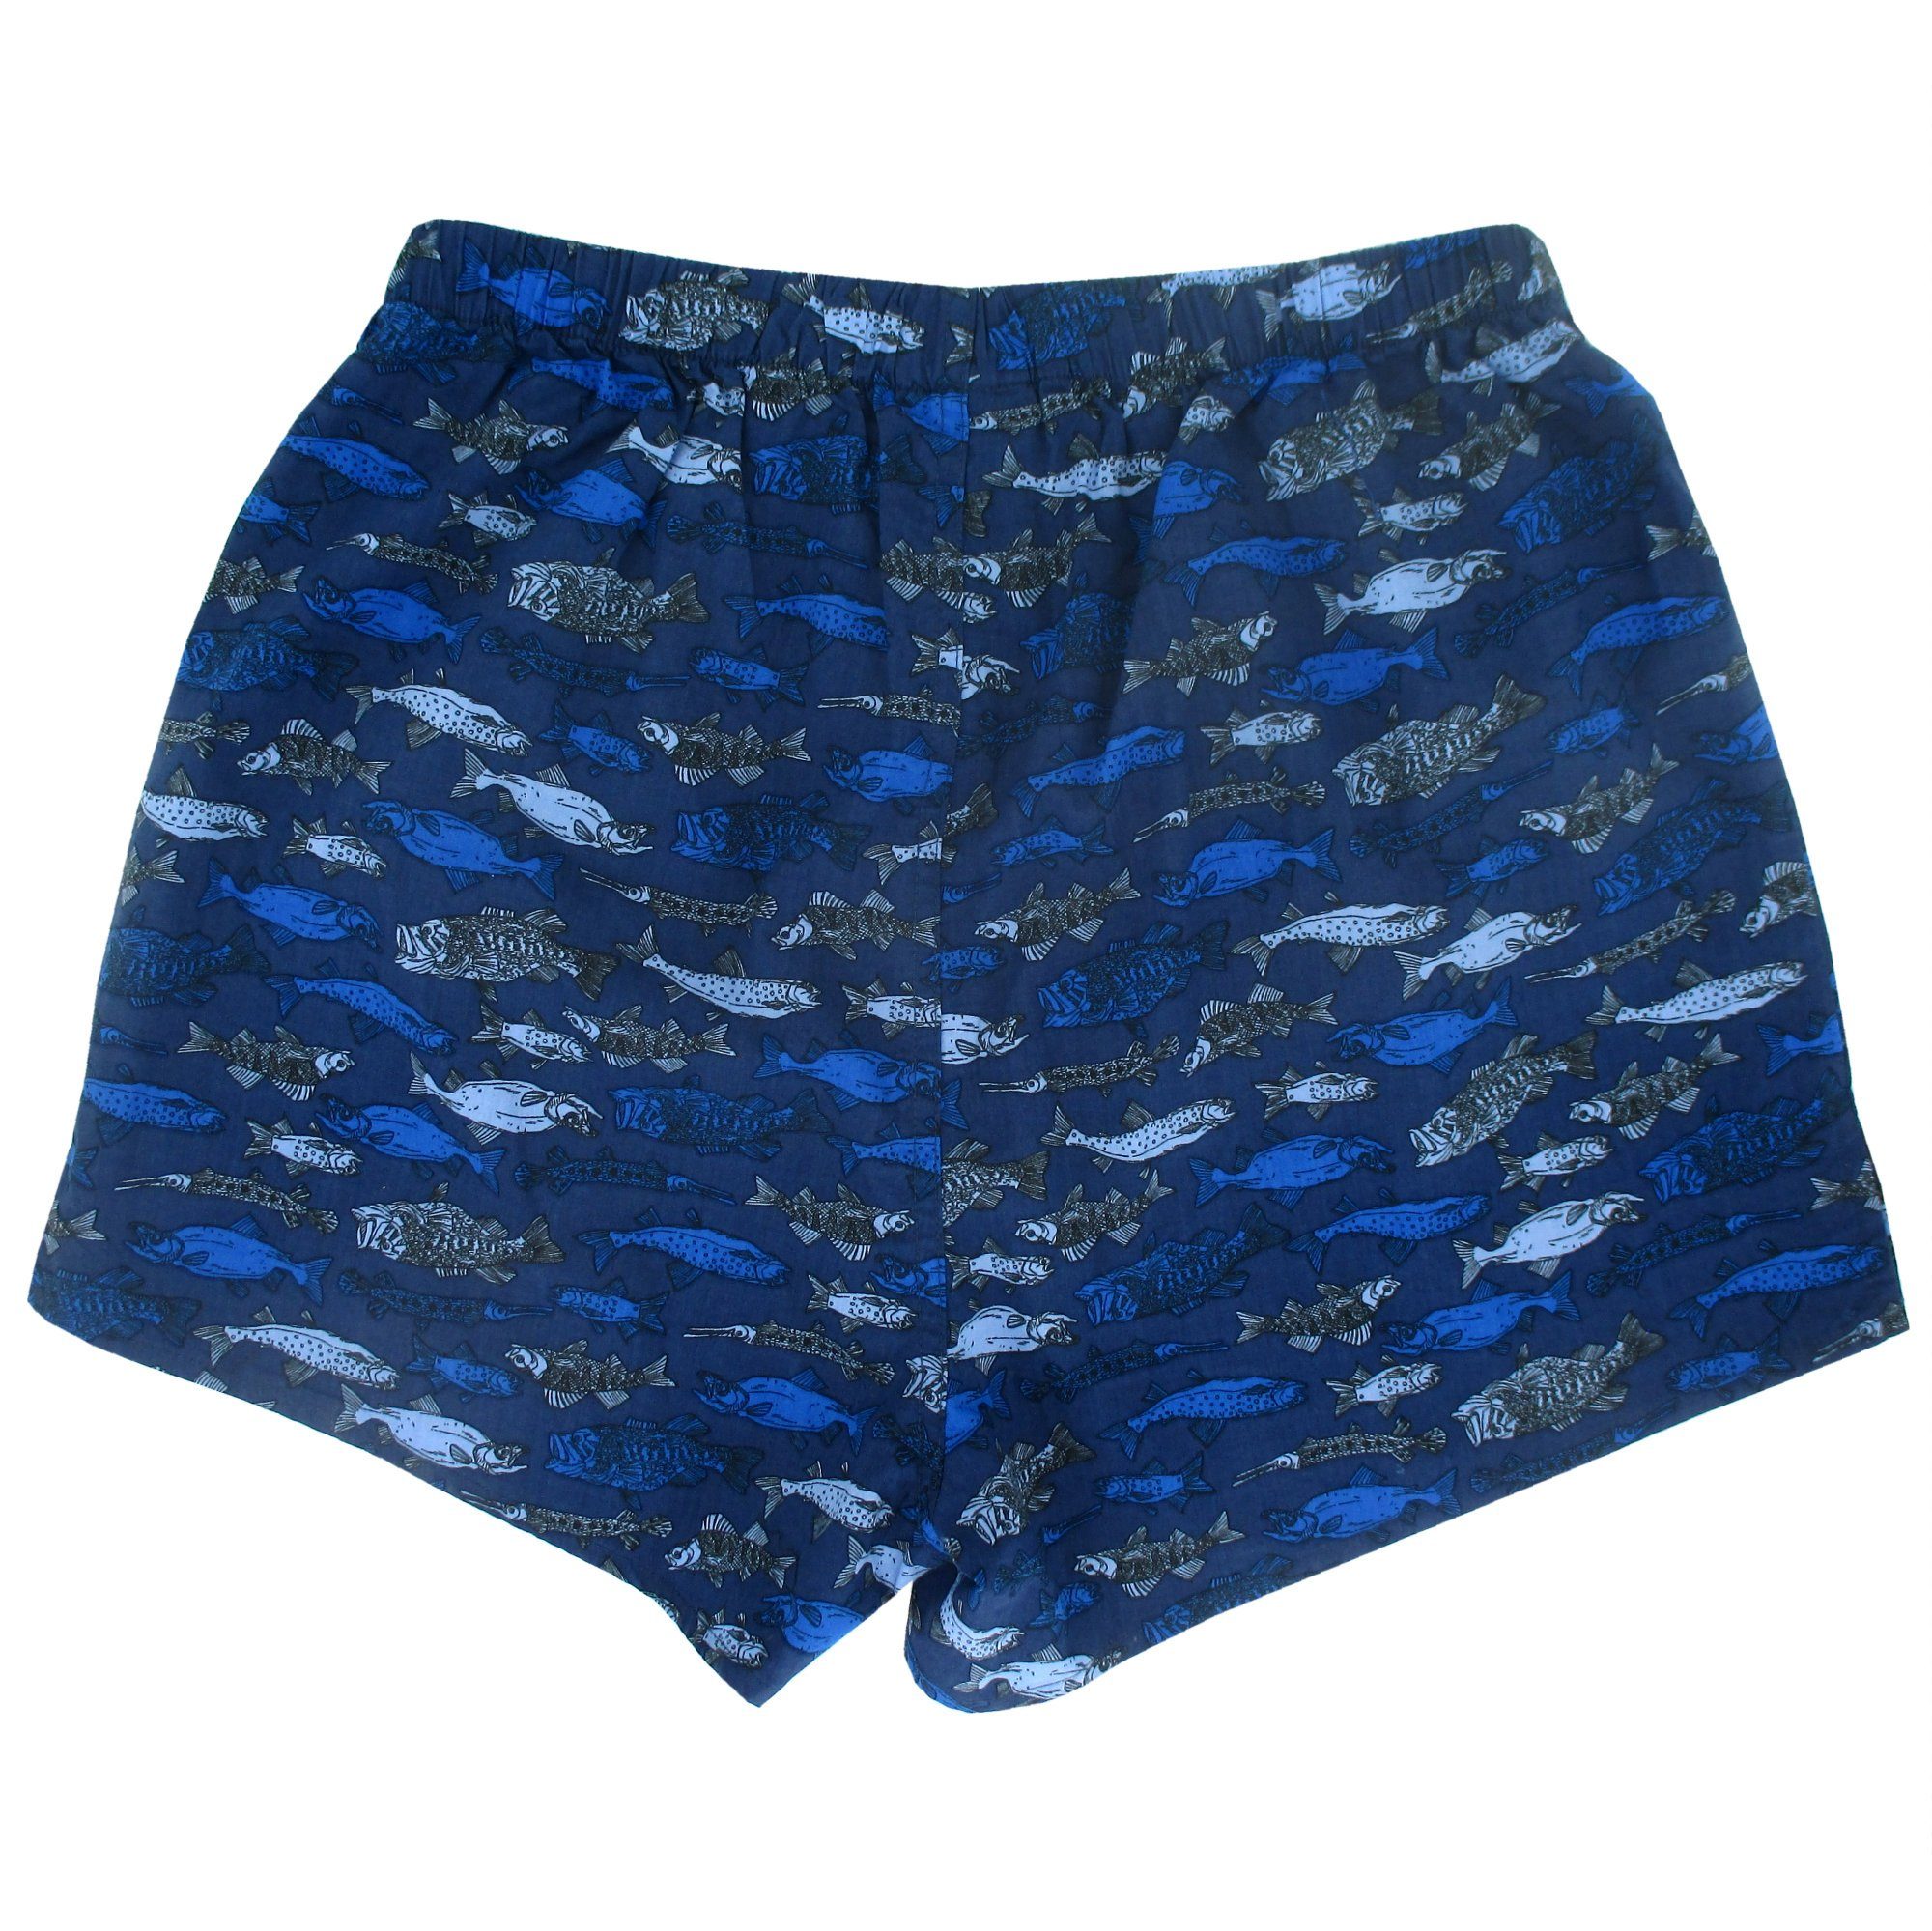 Fishing Themed Men's Cotton Boxer Shorts with Fish All Over Print in Blue